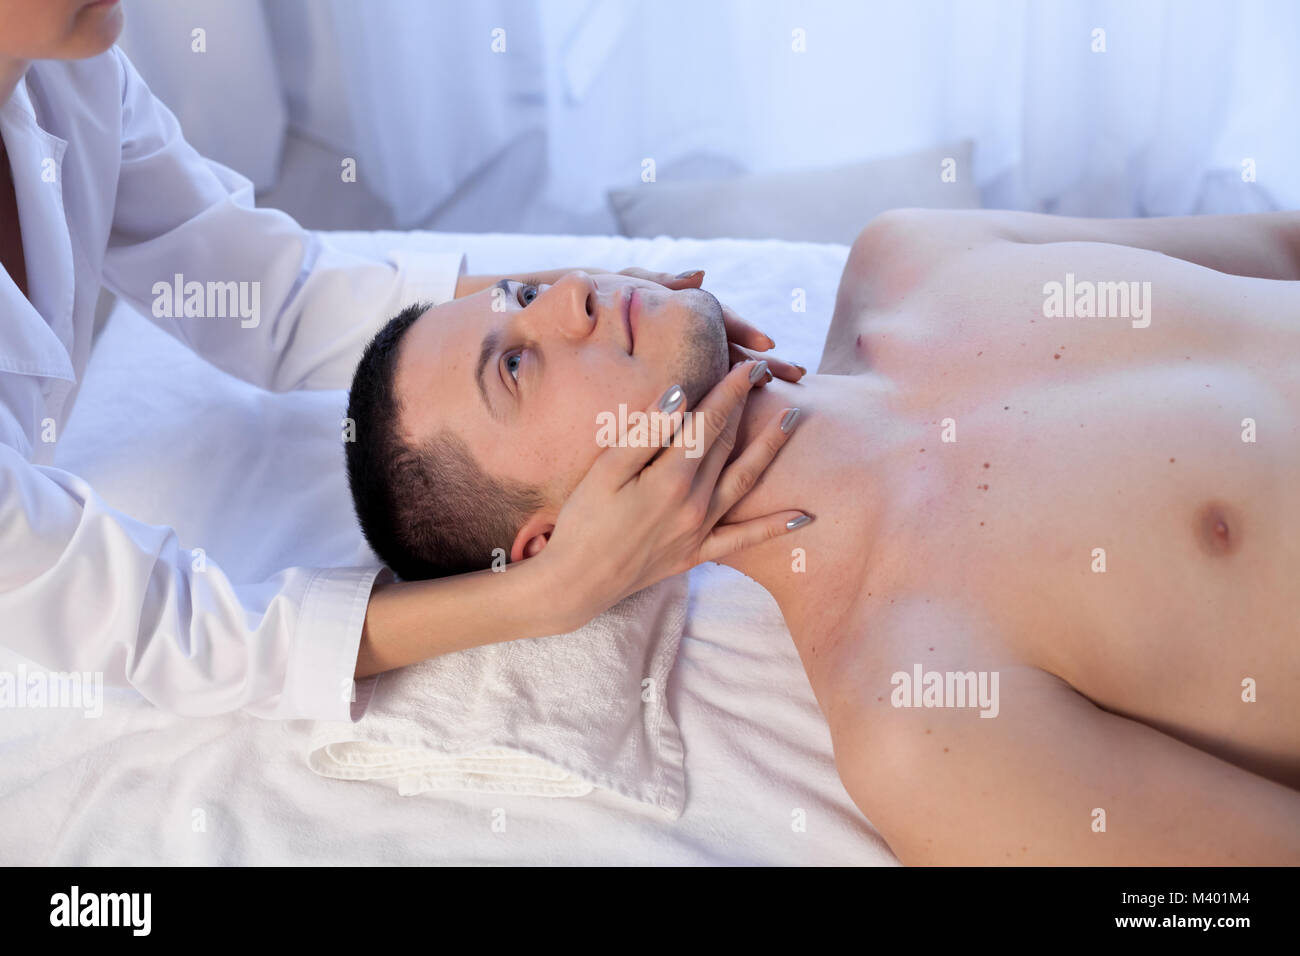 male masseuse makes a therapeutic massage in the Spa Stock Photo